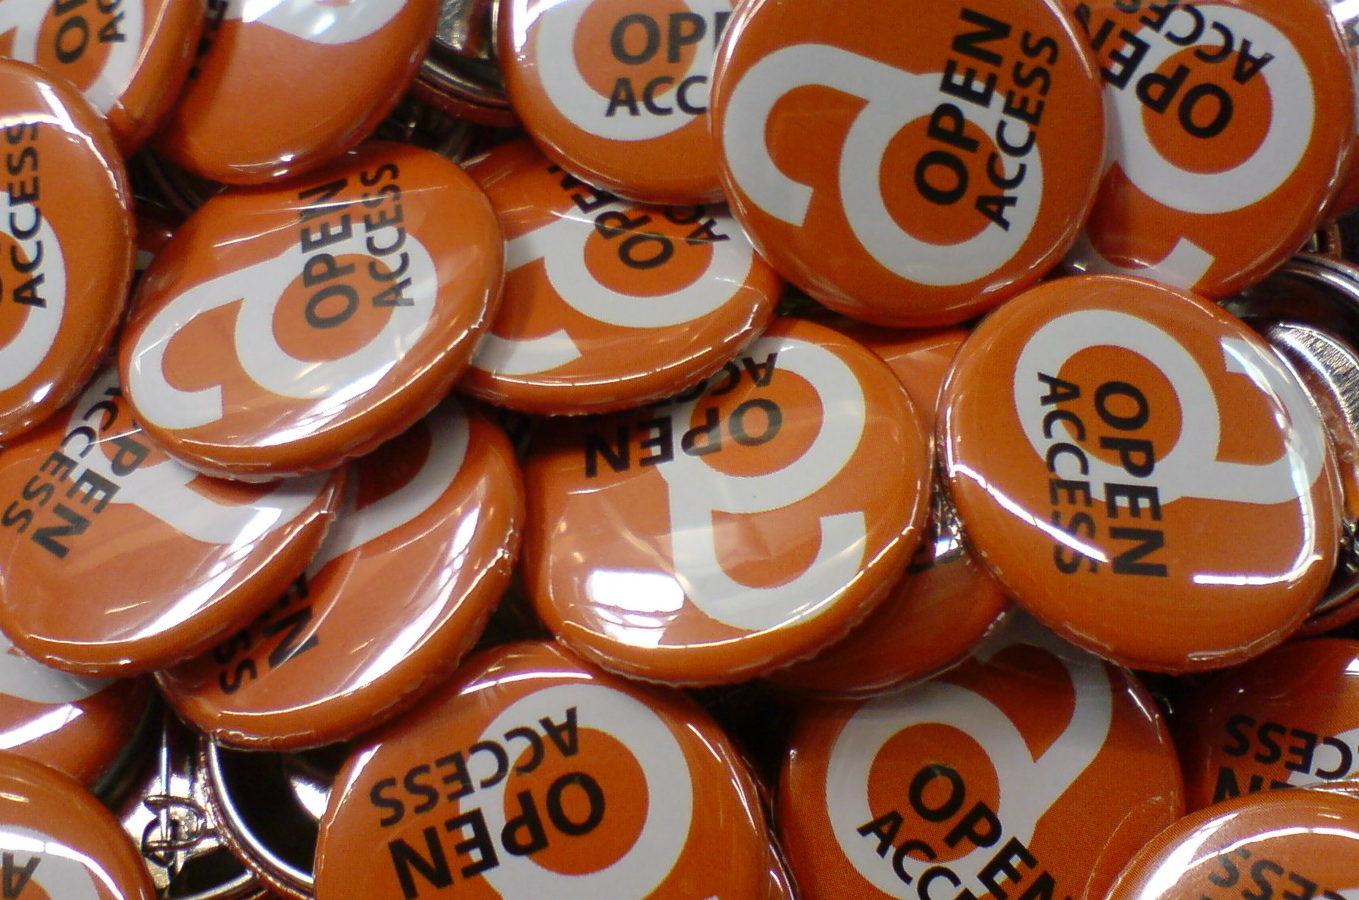 Close up picture of little open access buttons